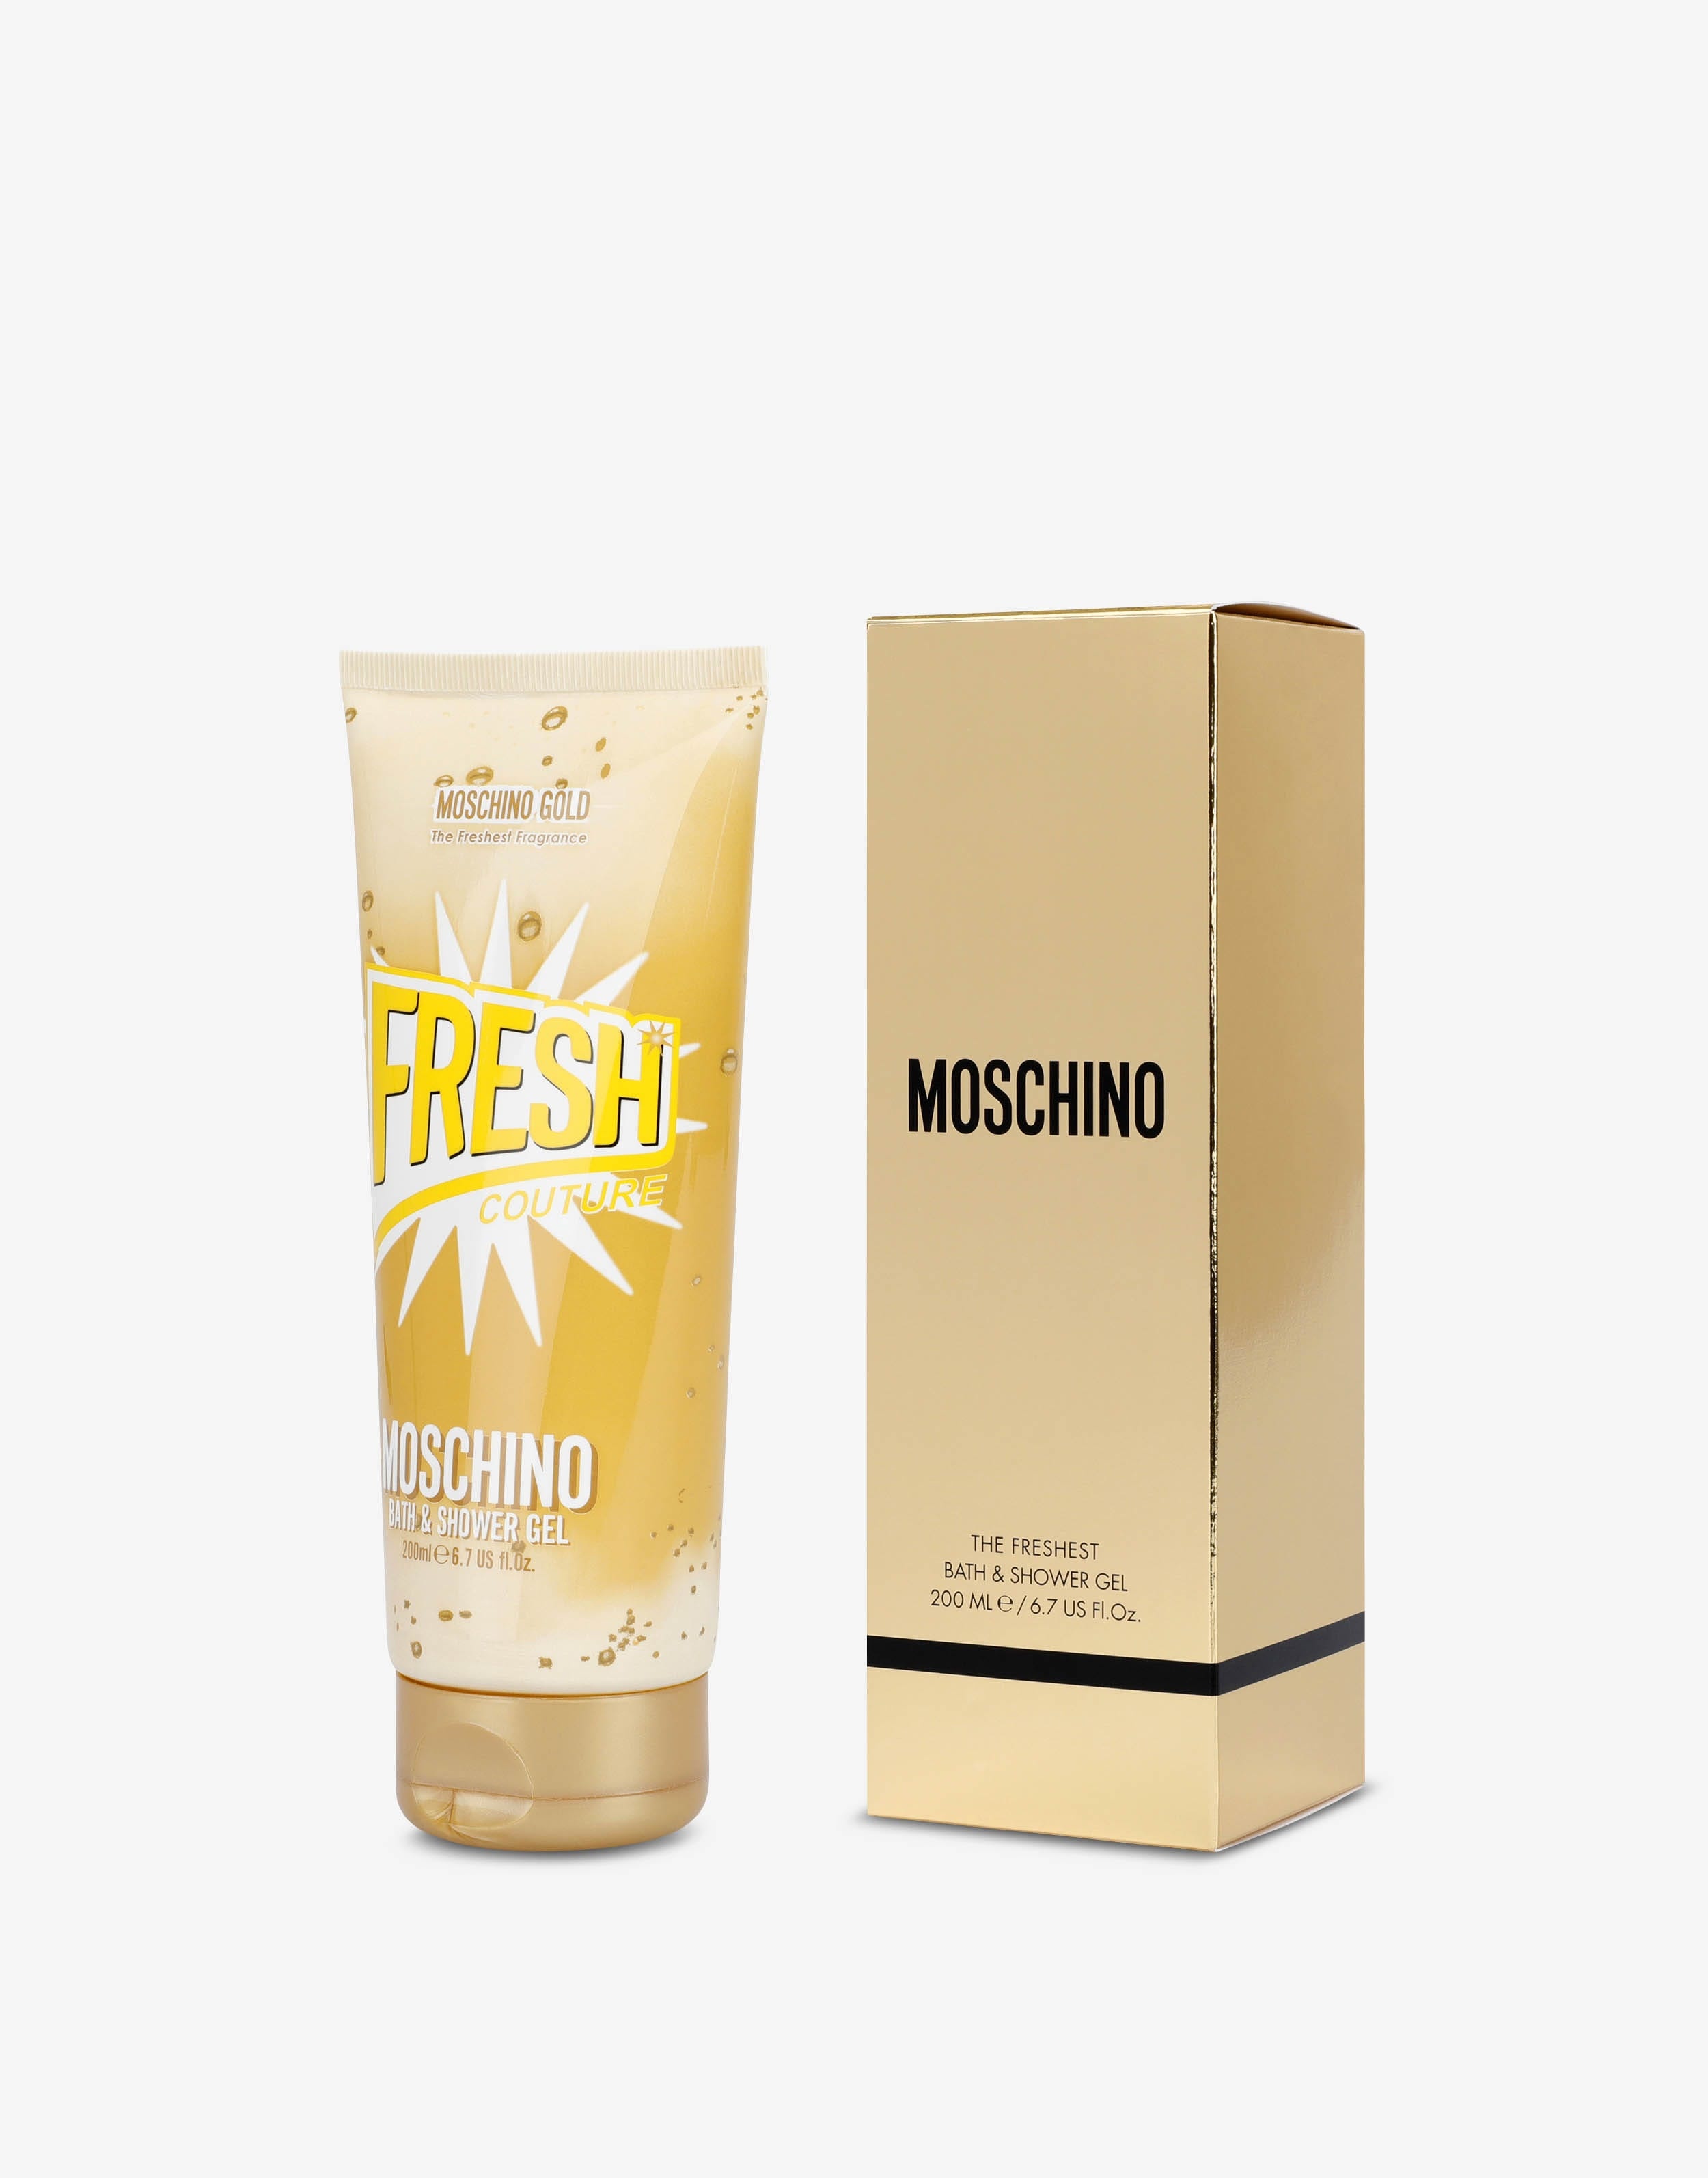 THE FRESHEST GOLD FRESH COUTURE SHOWER GEL - 2